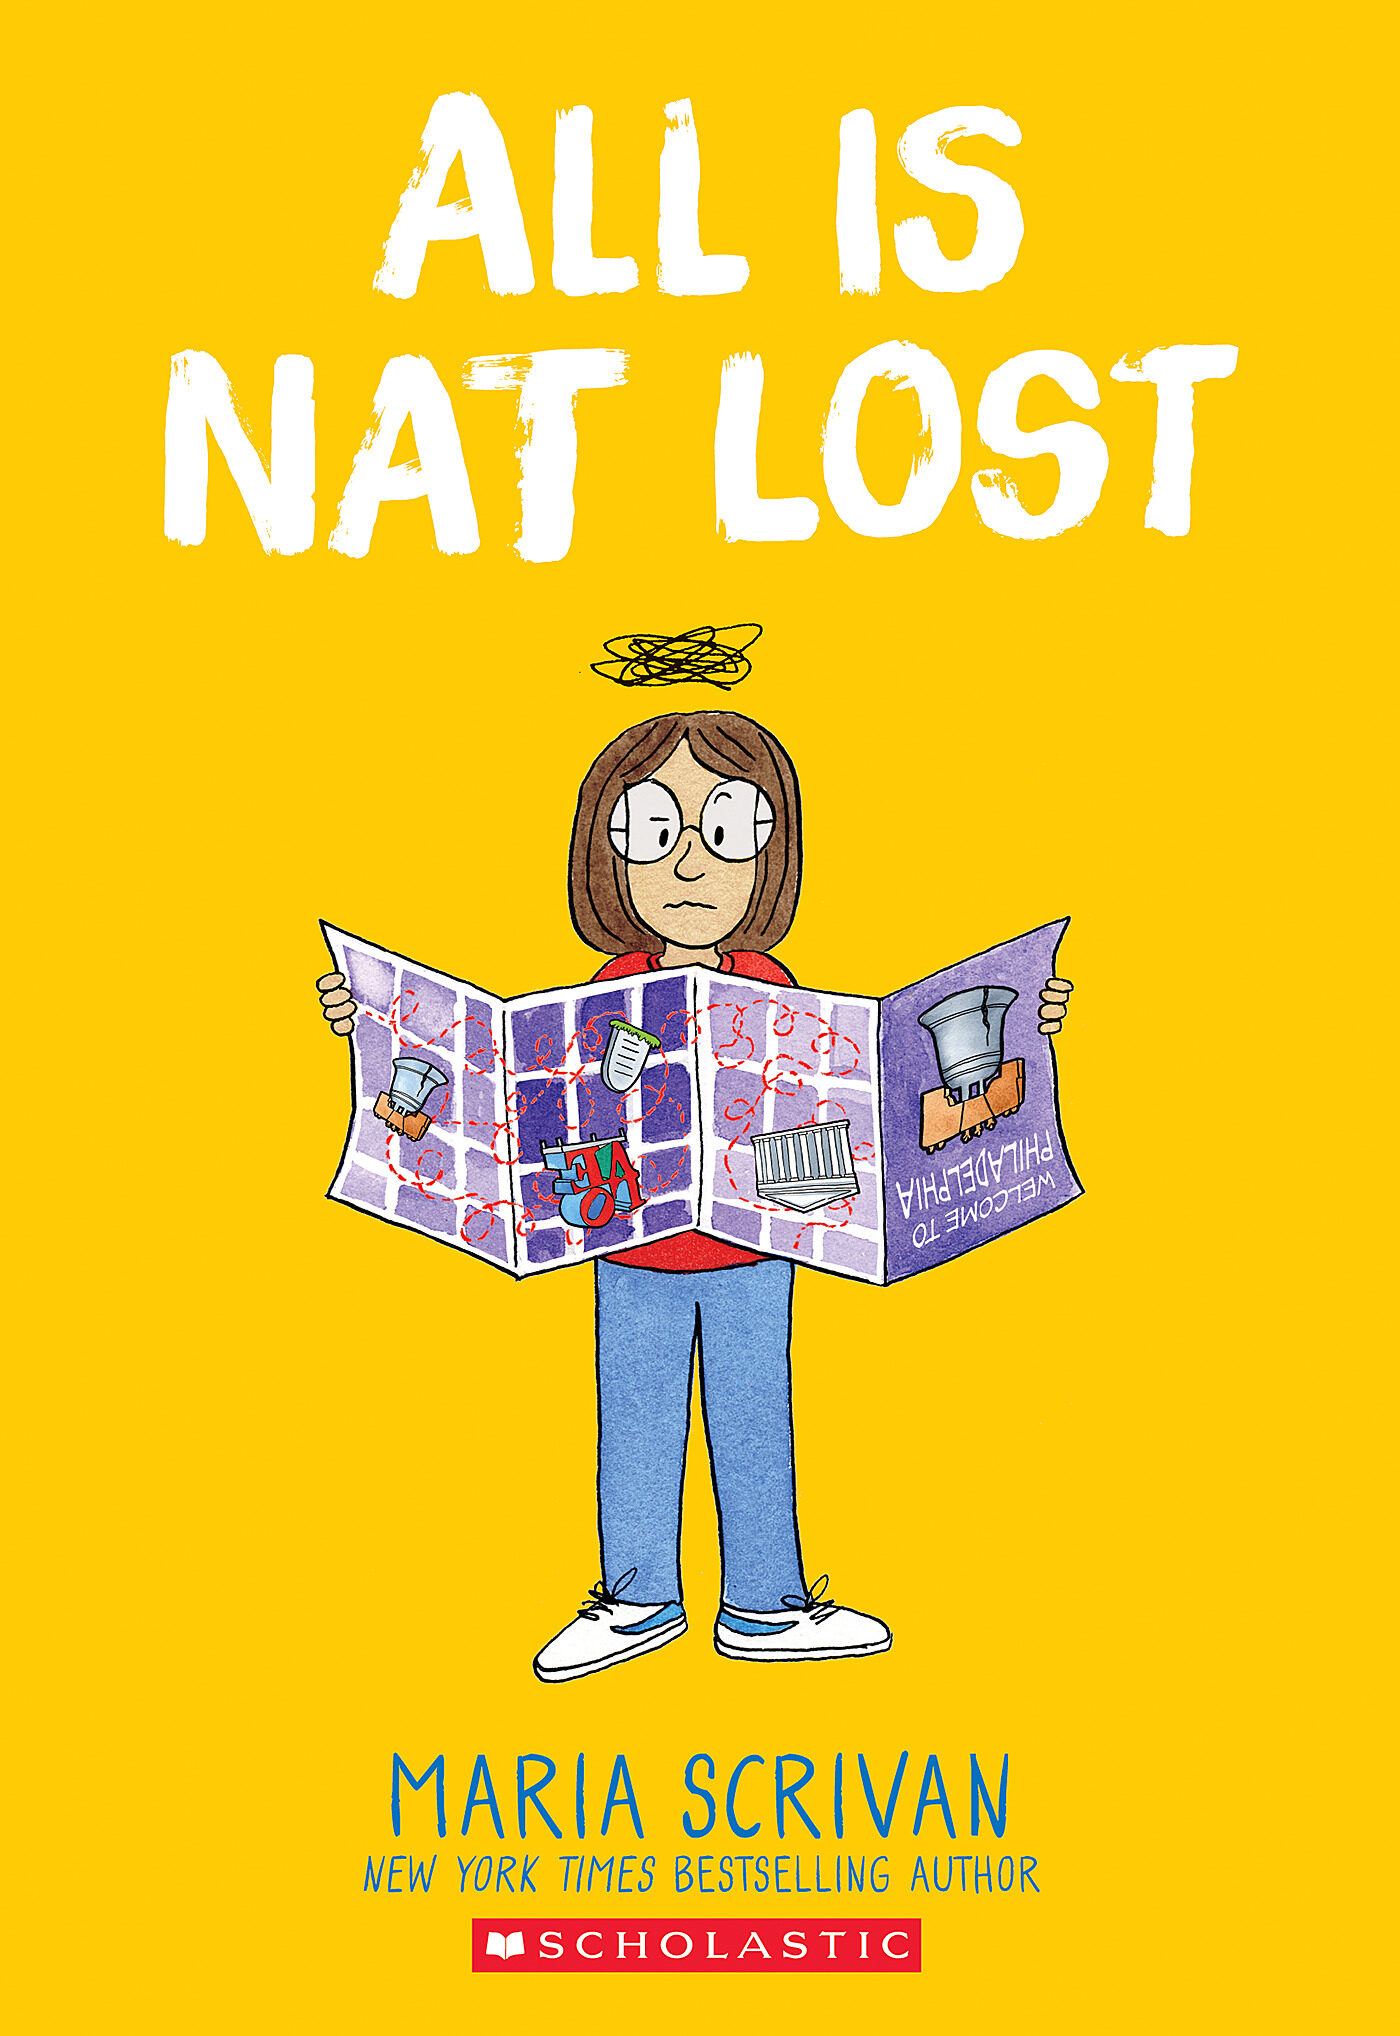 All Is Nat Lost: A Graphic Novel cover image